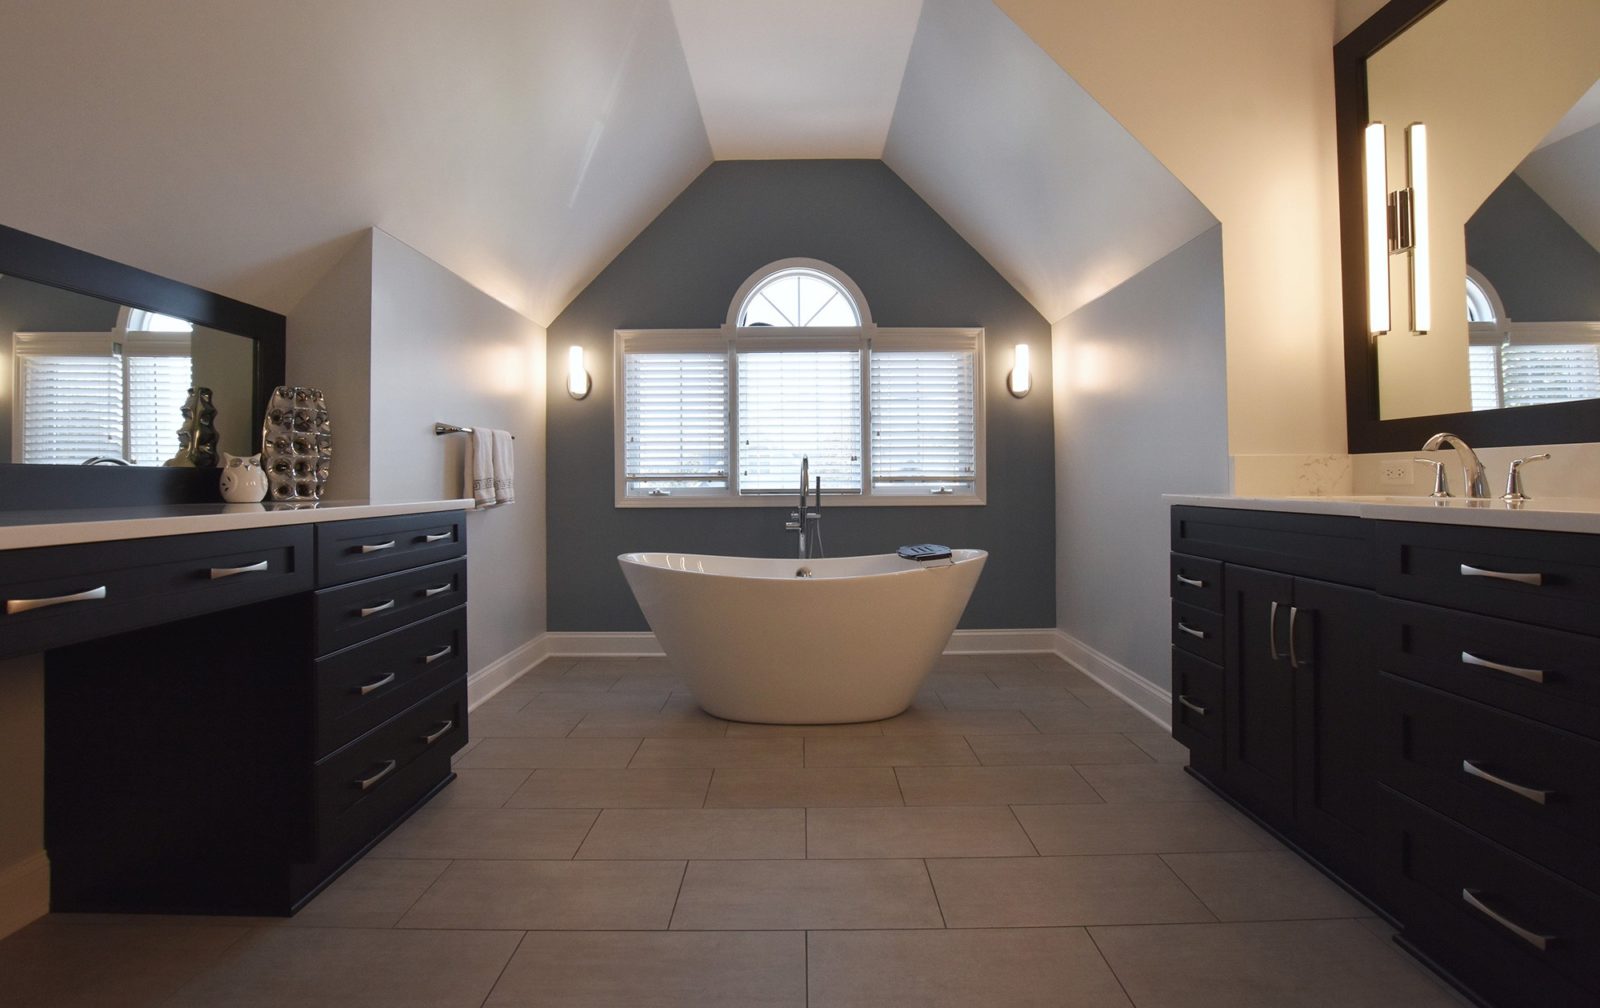 Bathroom with free-standing bathtub in middle, windows, sinks on one side and counter on other side